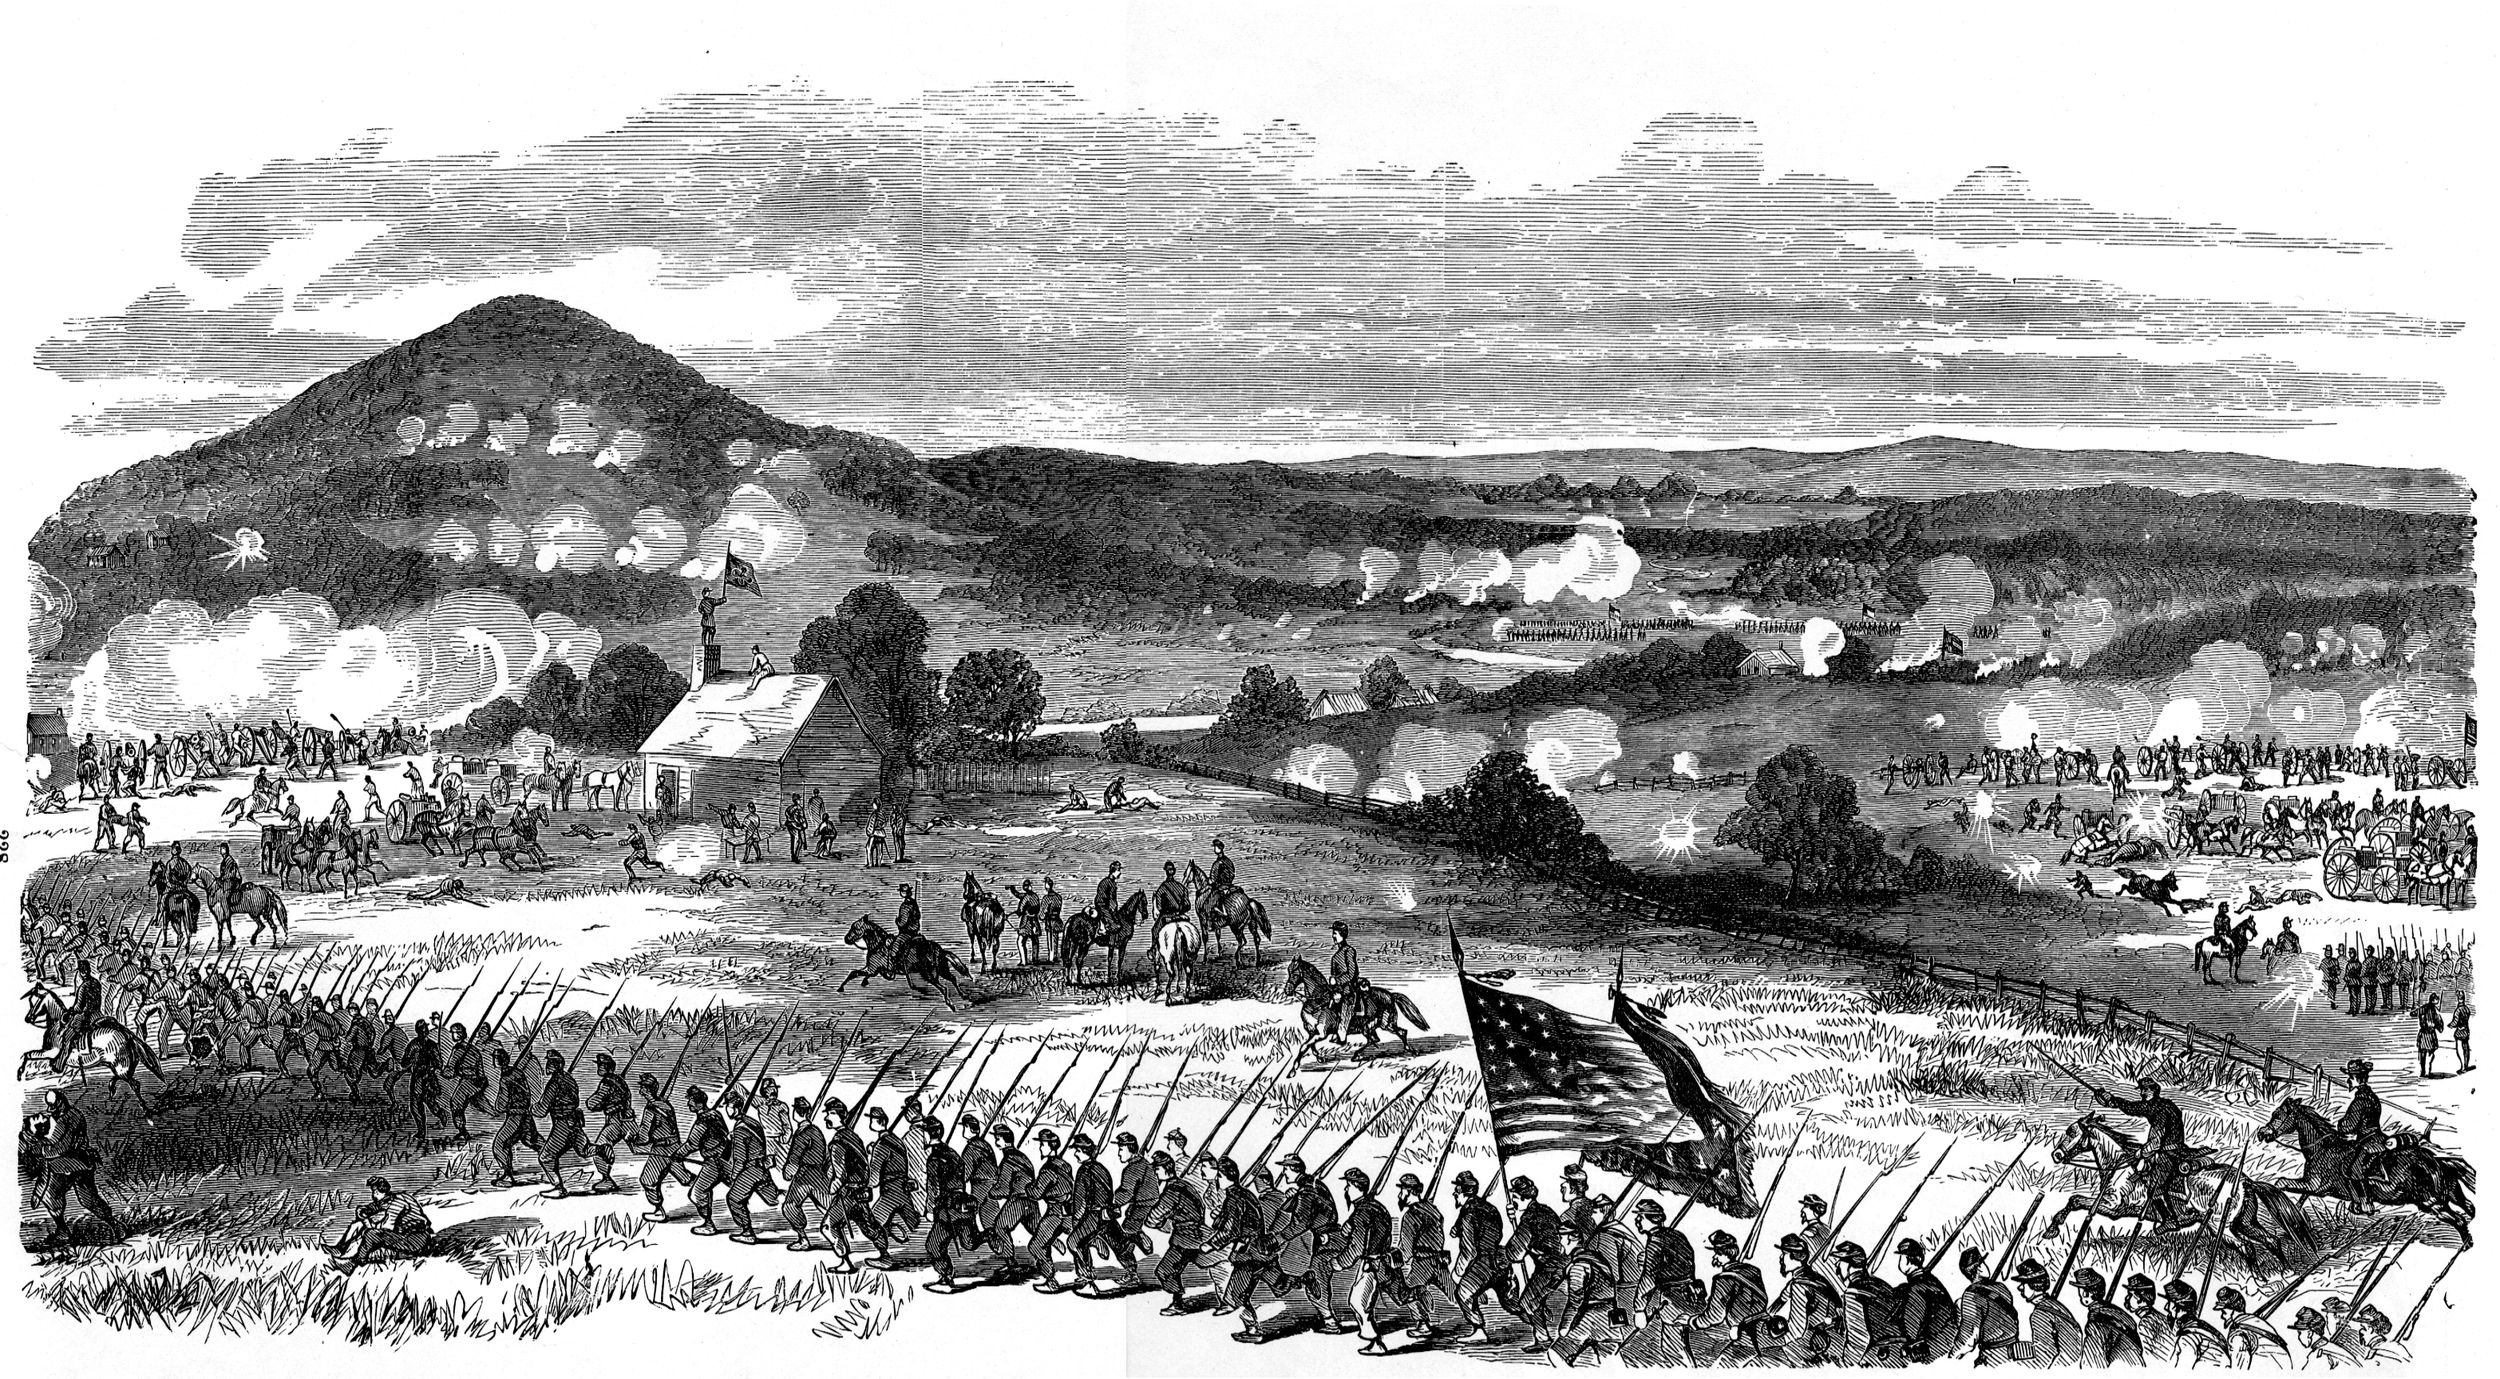 The final repulse of the Union troops at Cedar Mountain was not as orderly as this illustration suggests.